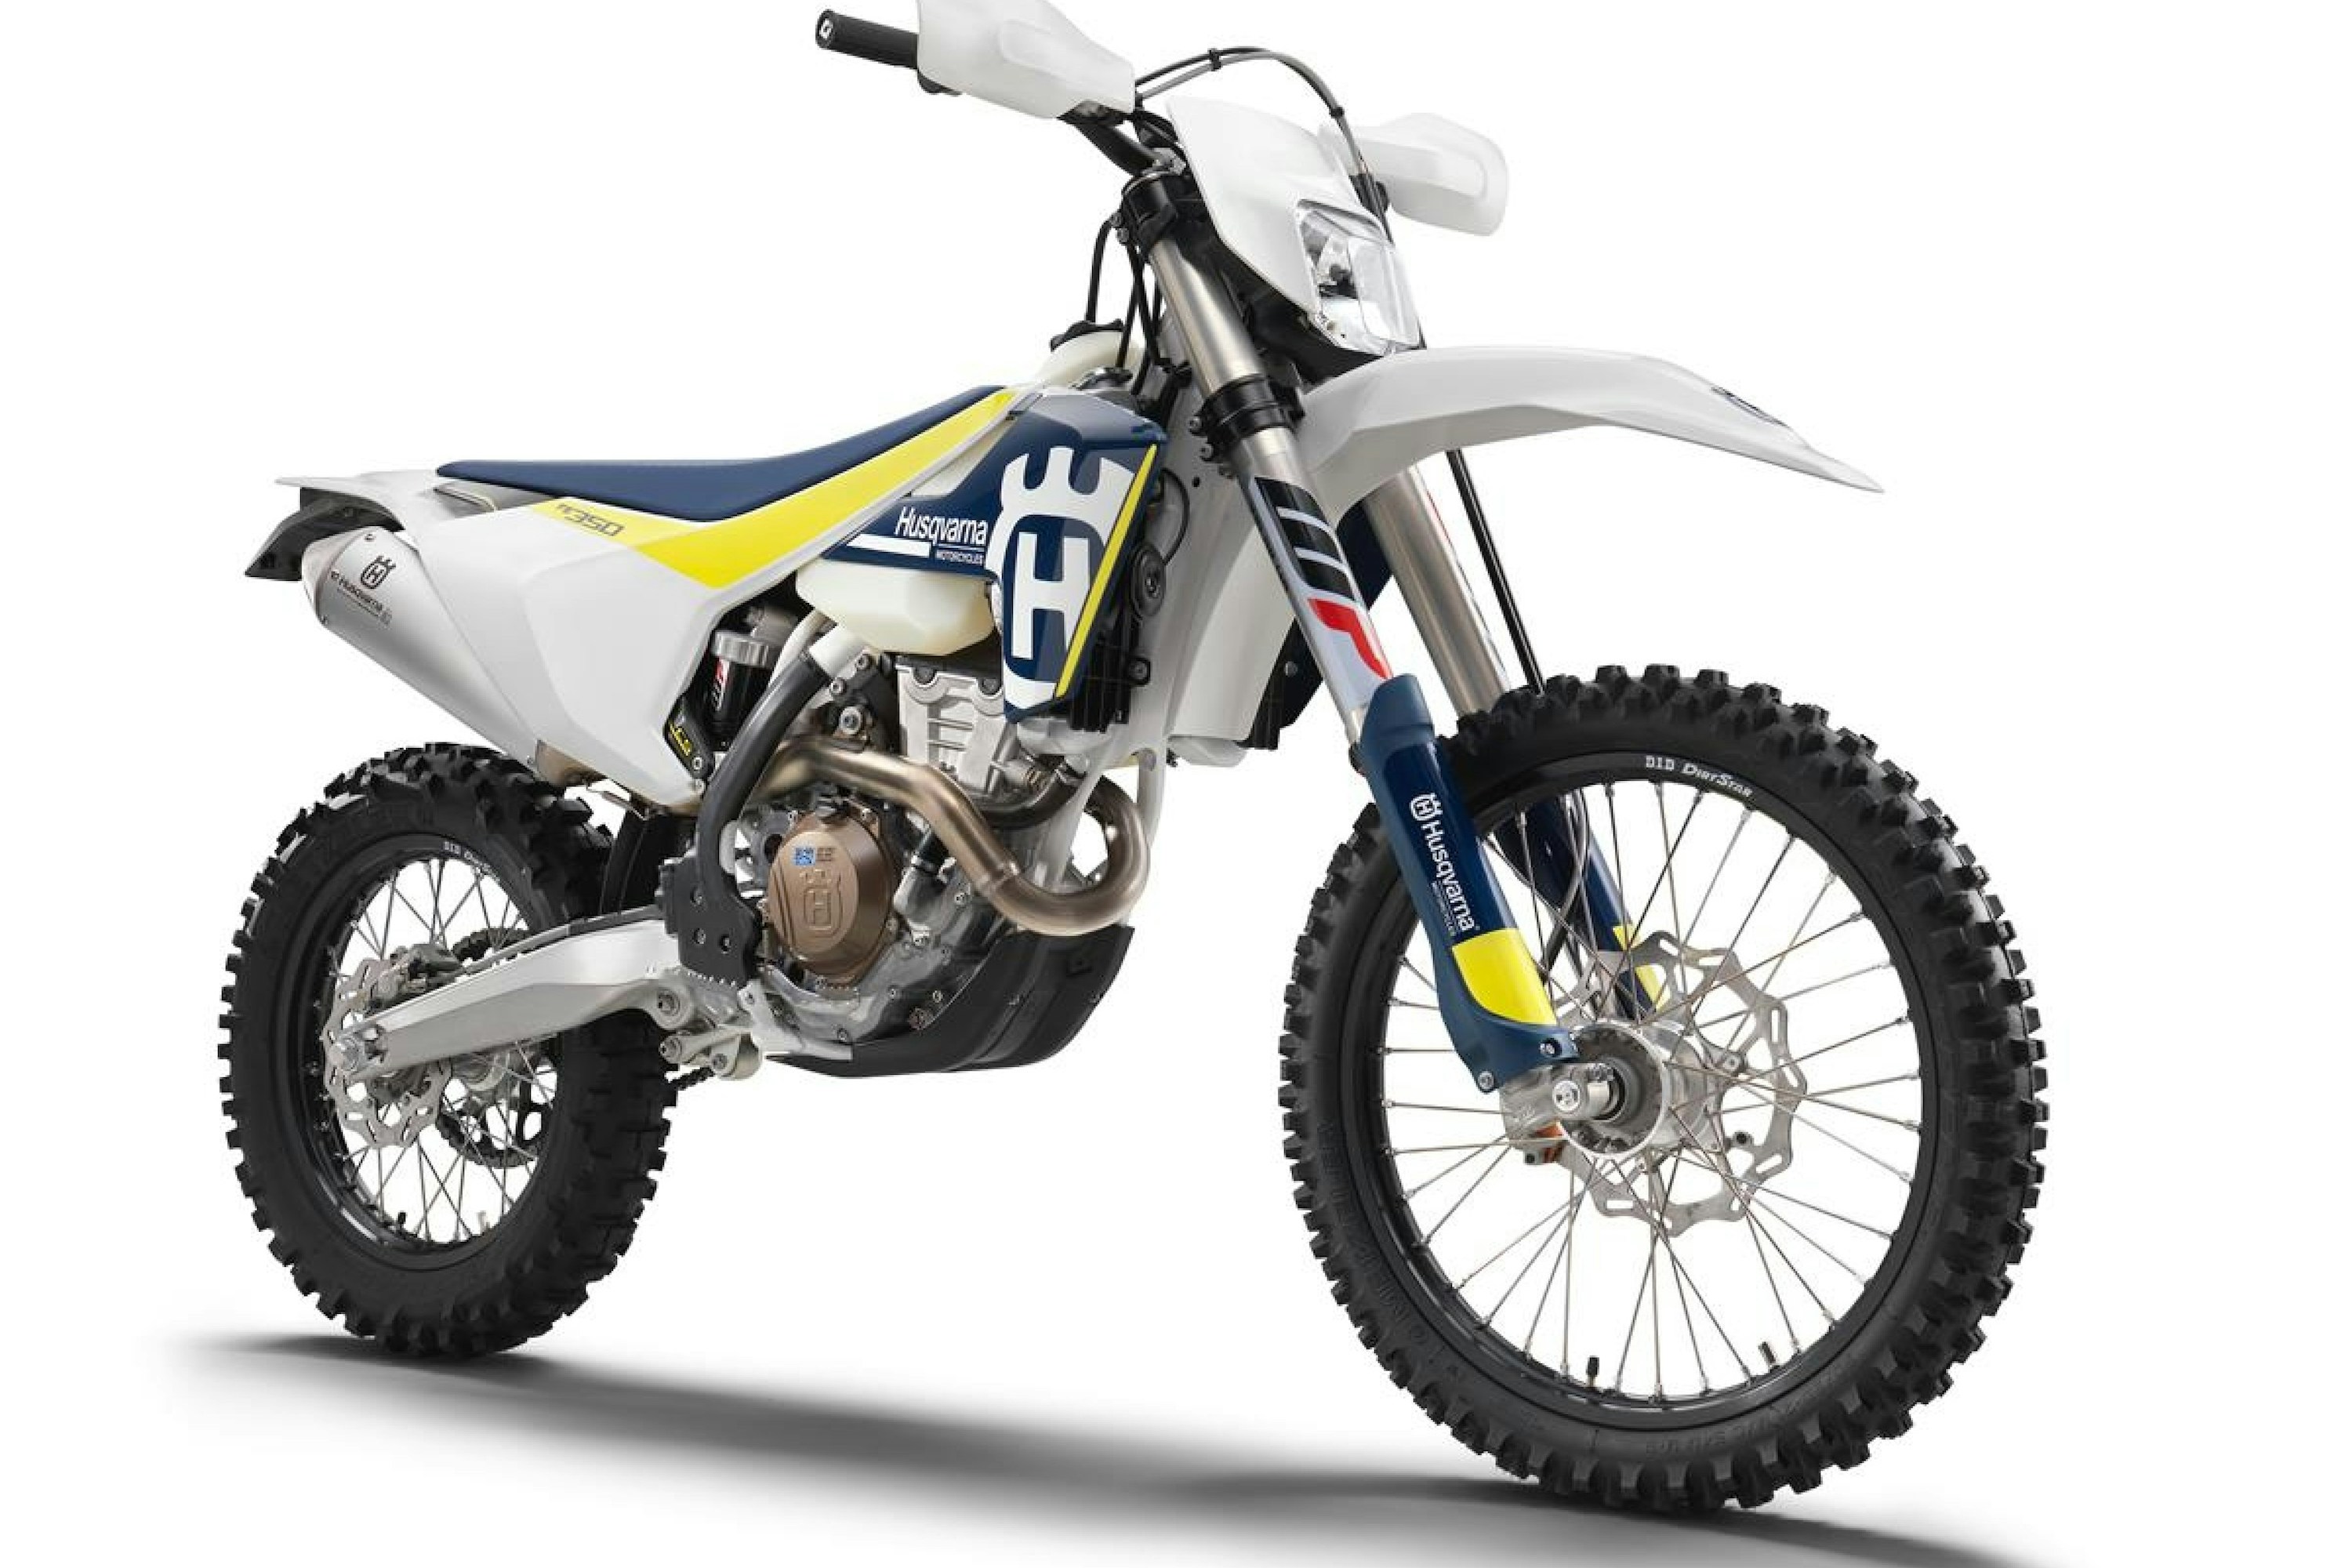 Seven things we learnt about the 2017 Husqvarna 701 Enduro